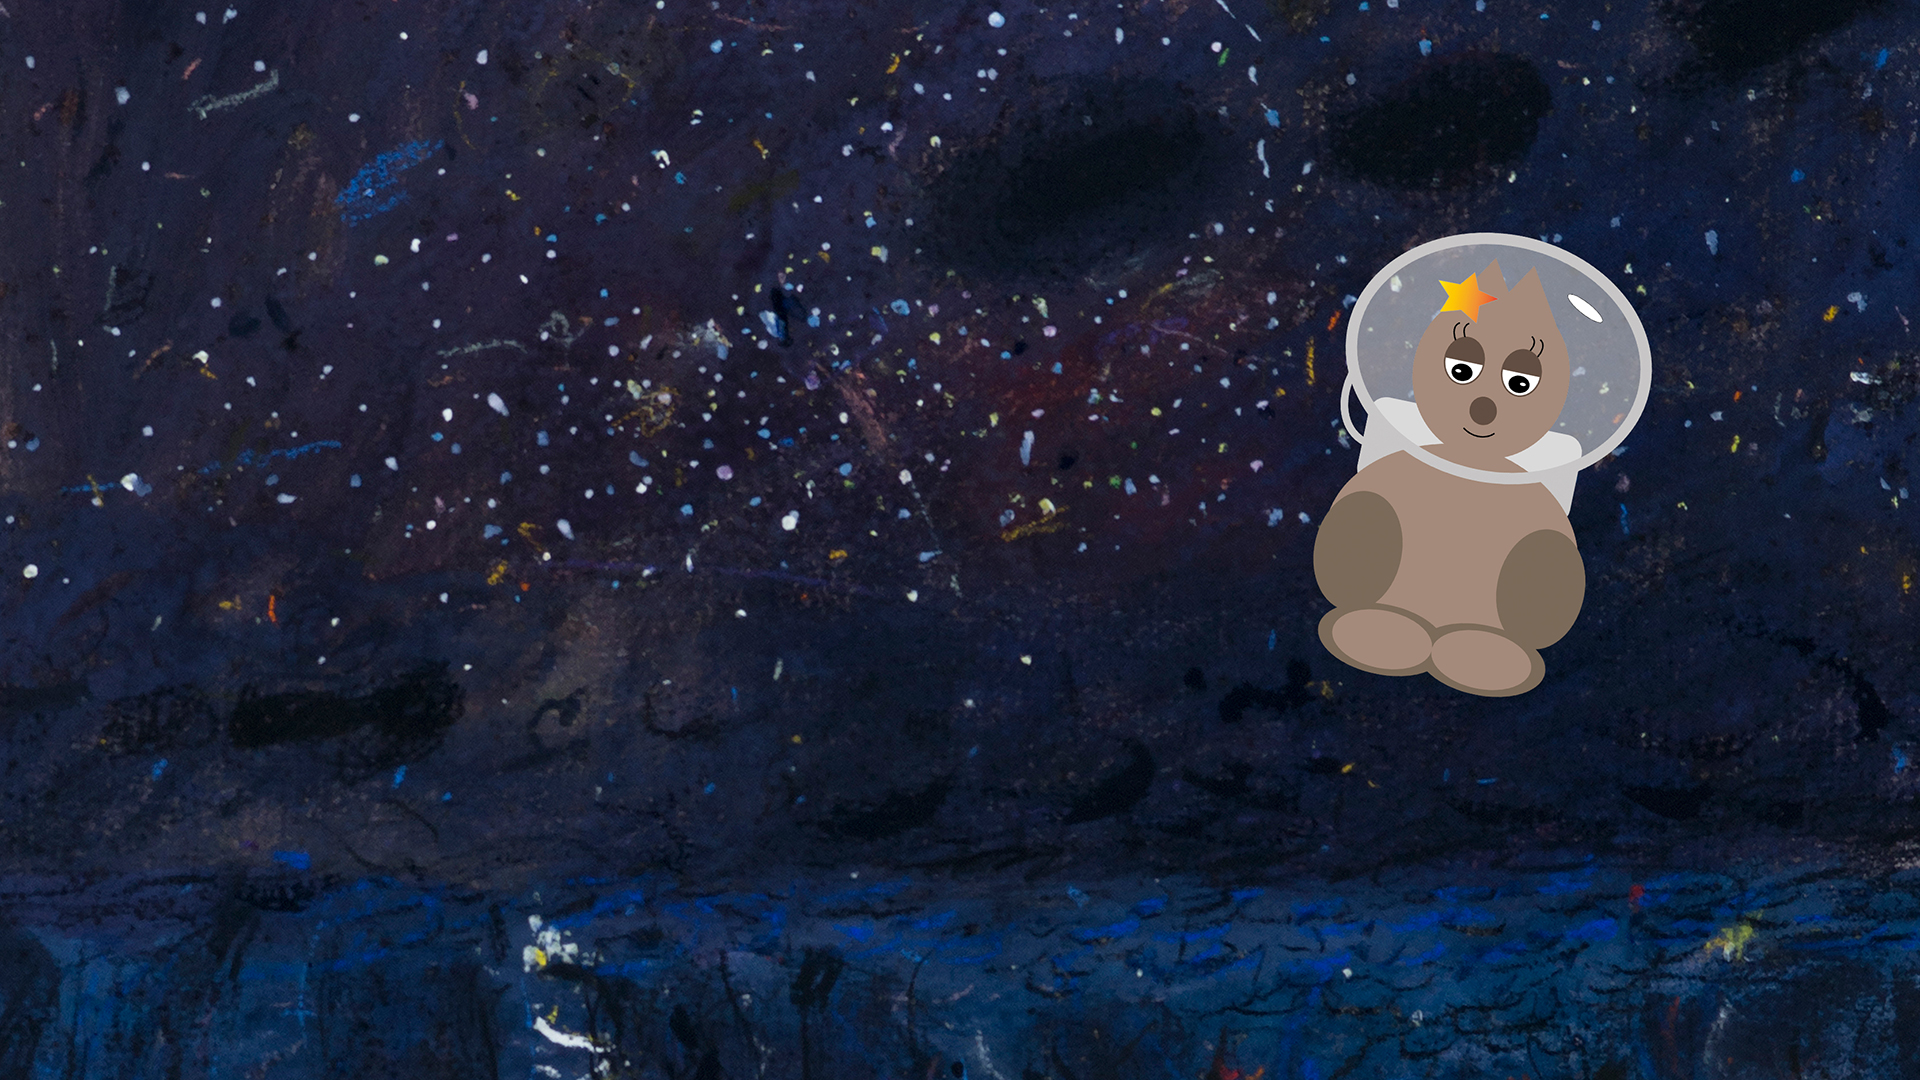 Illustration of a starry night sky with a pademelon dressed as an astronaut floating in space on the right